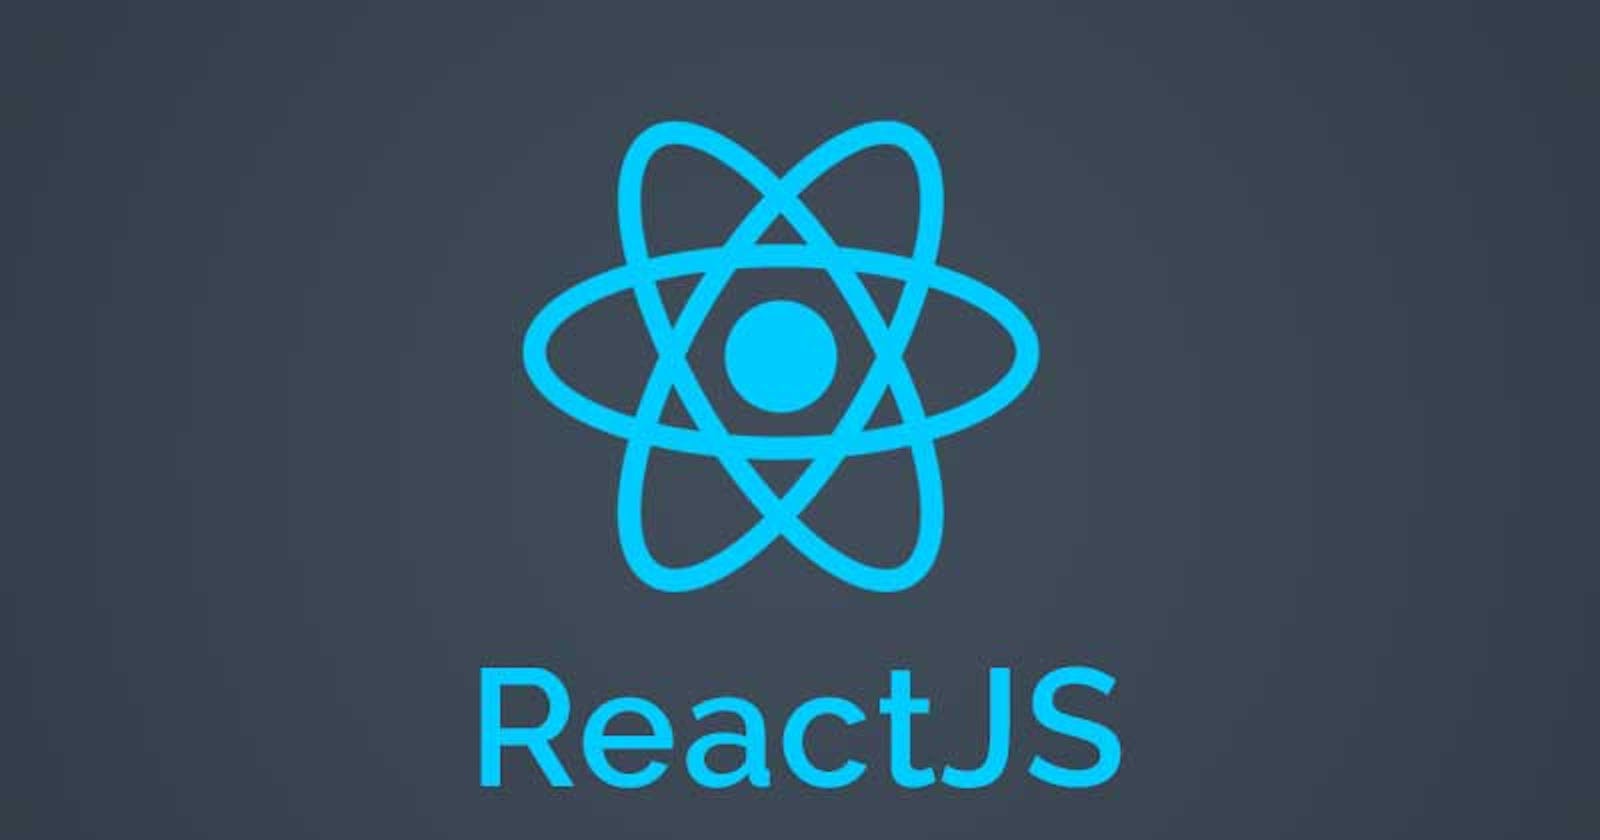 How Can ReactJS Help You Build a Faster, More Efficient Website?